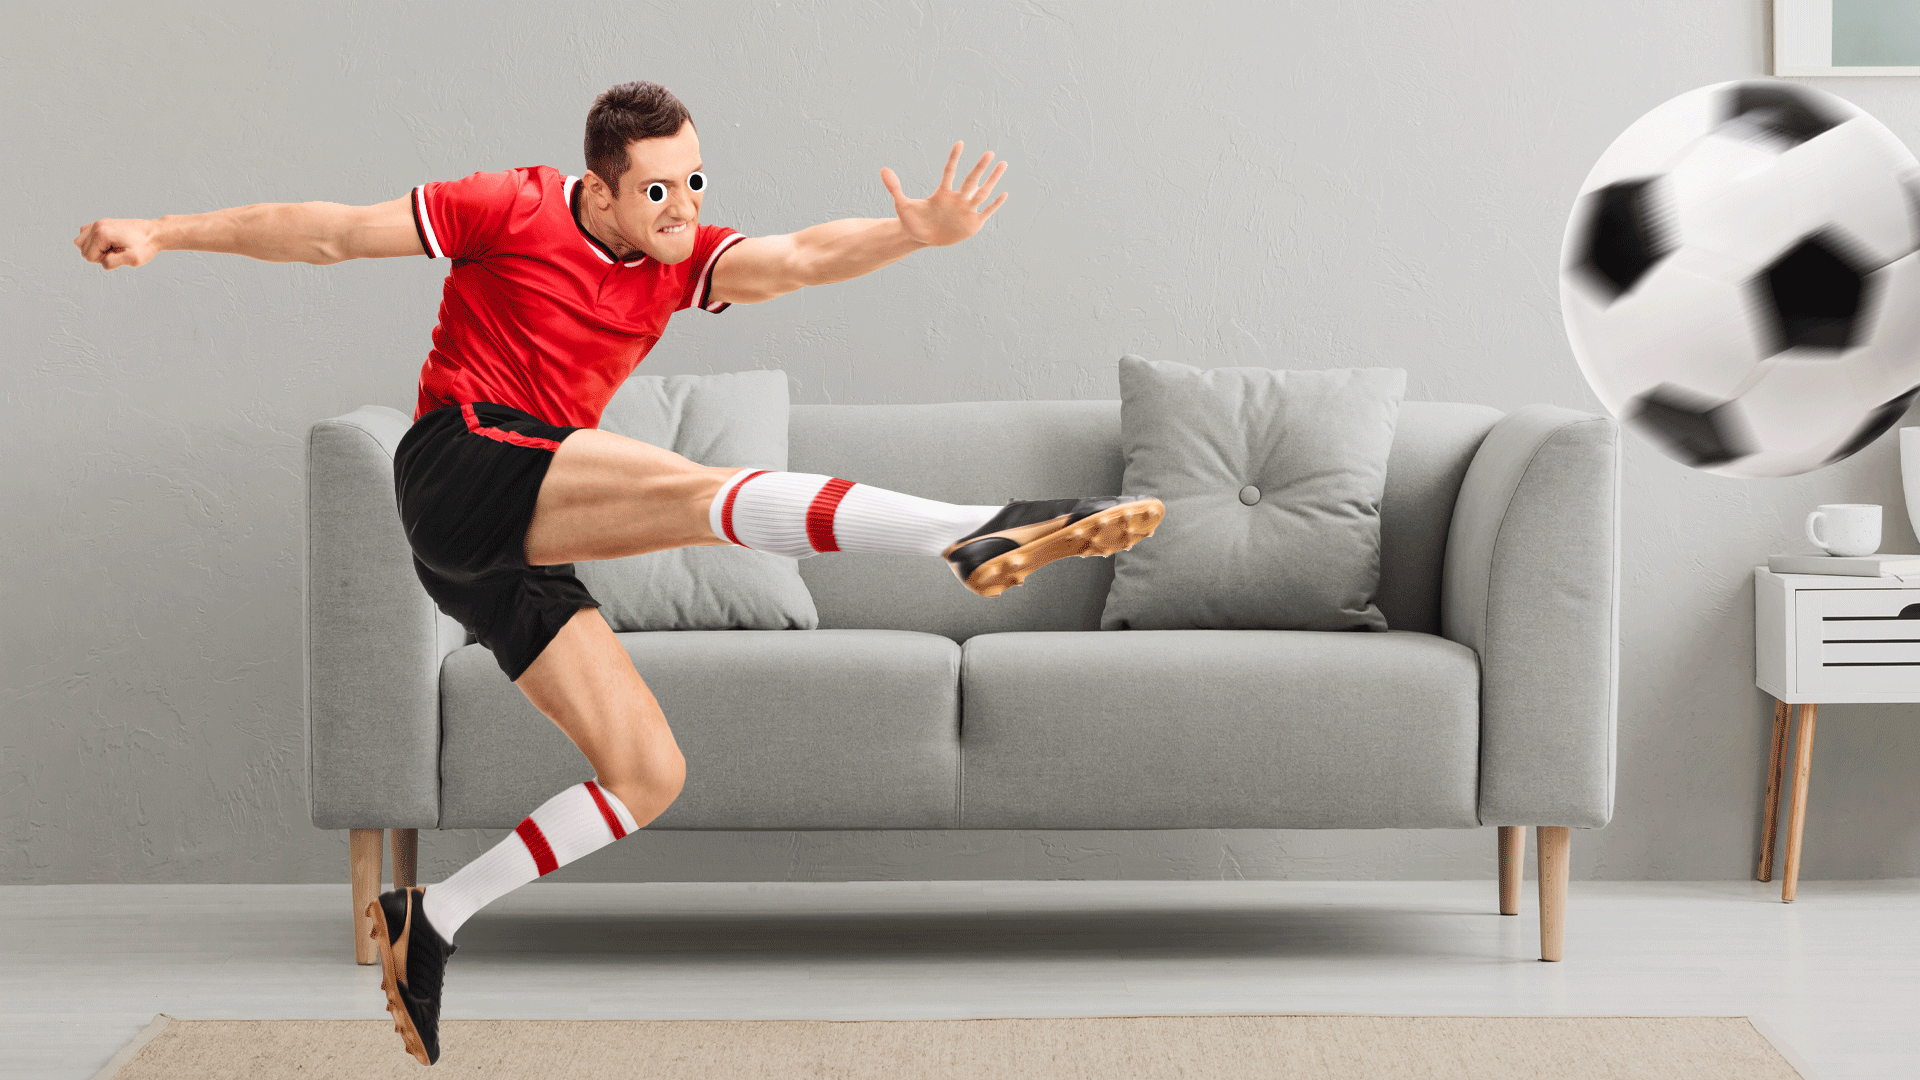 Football volley in the living room